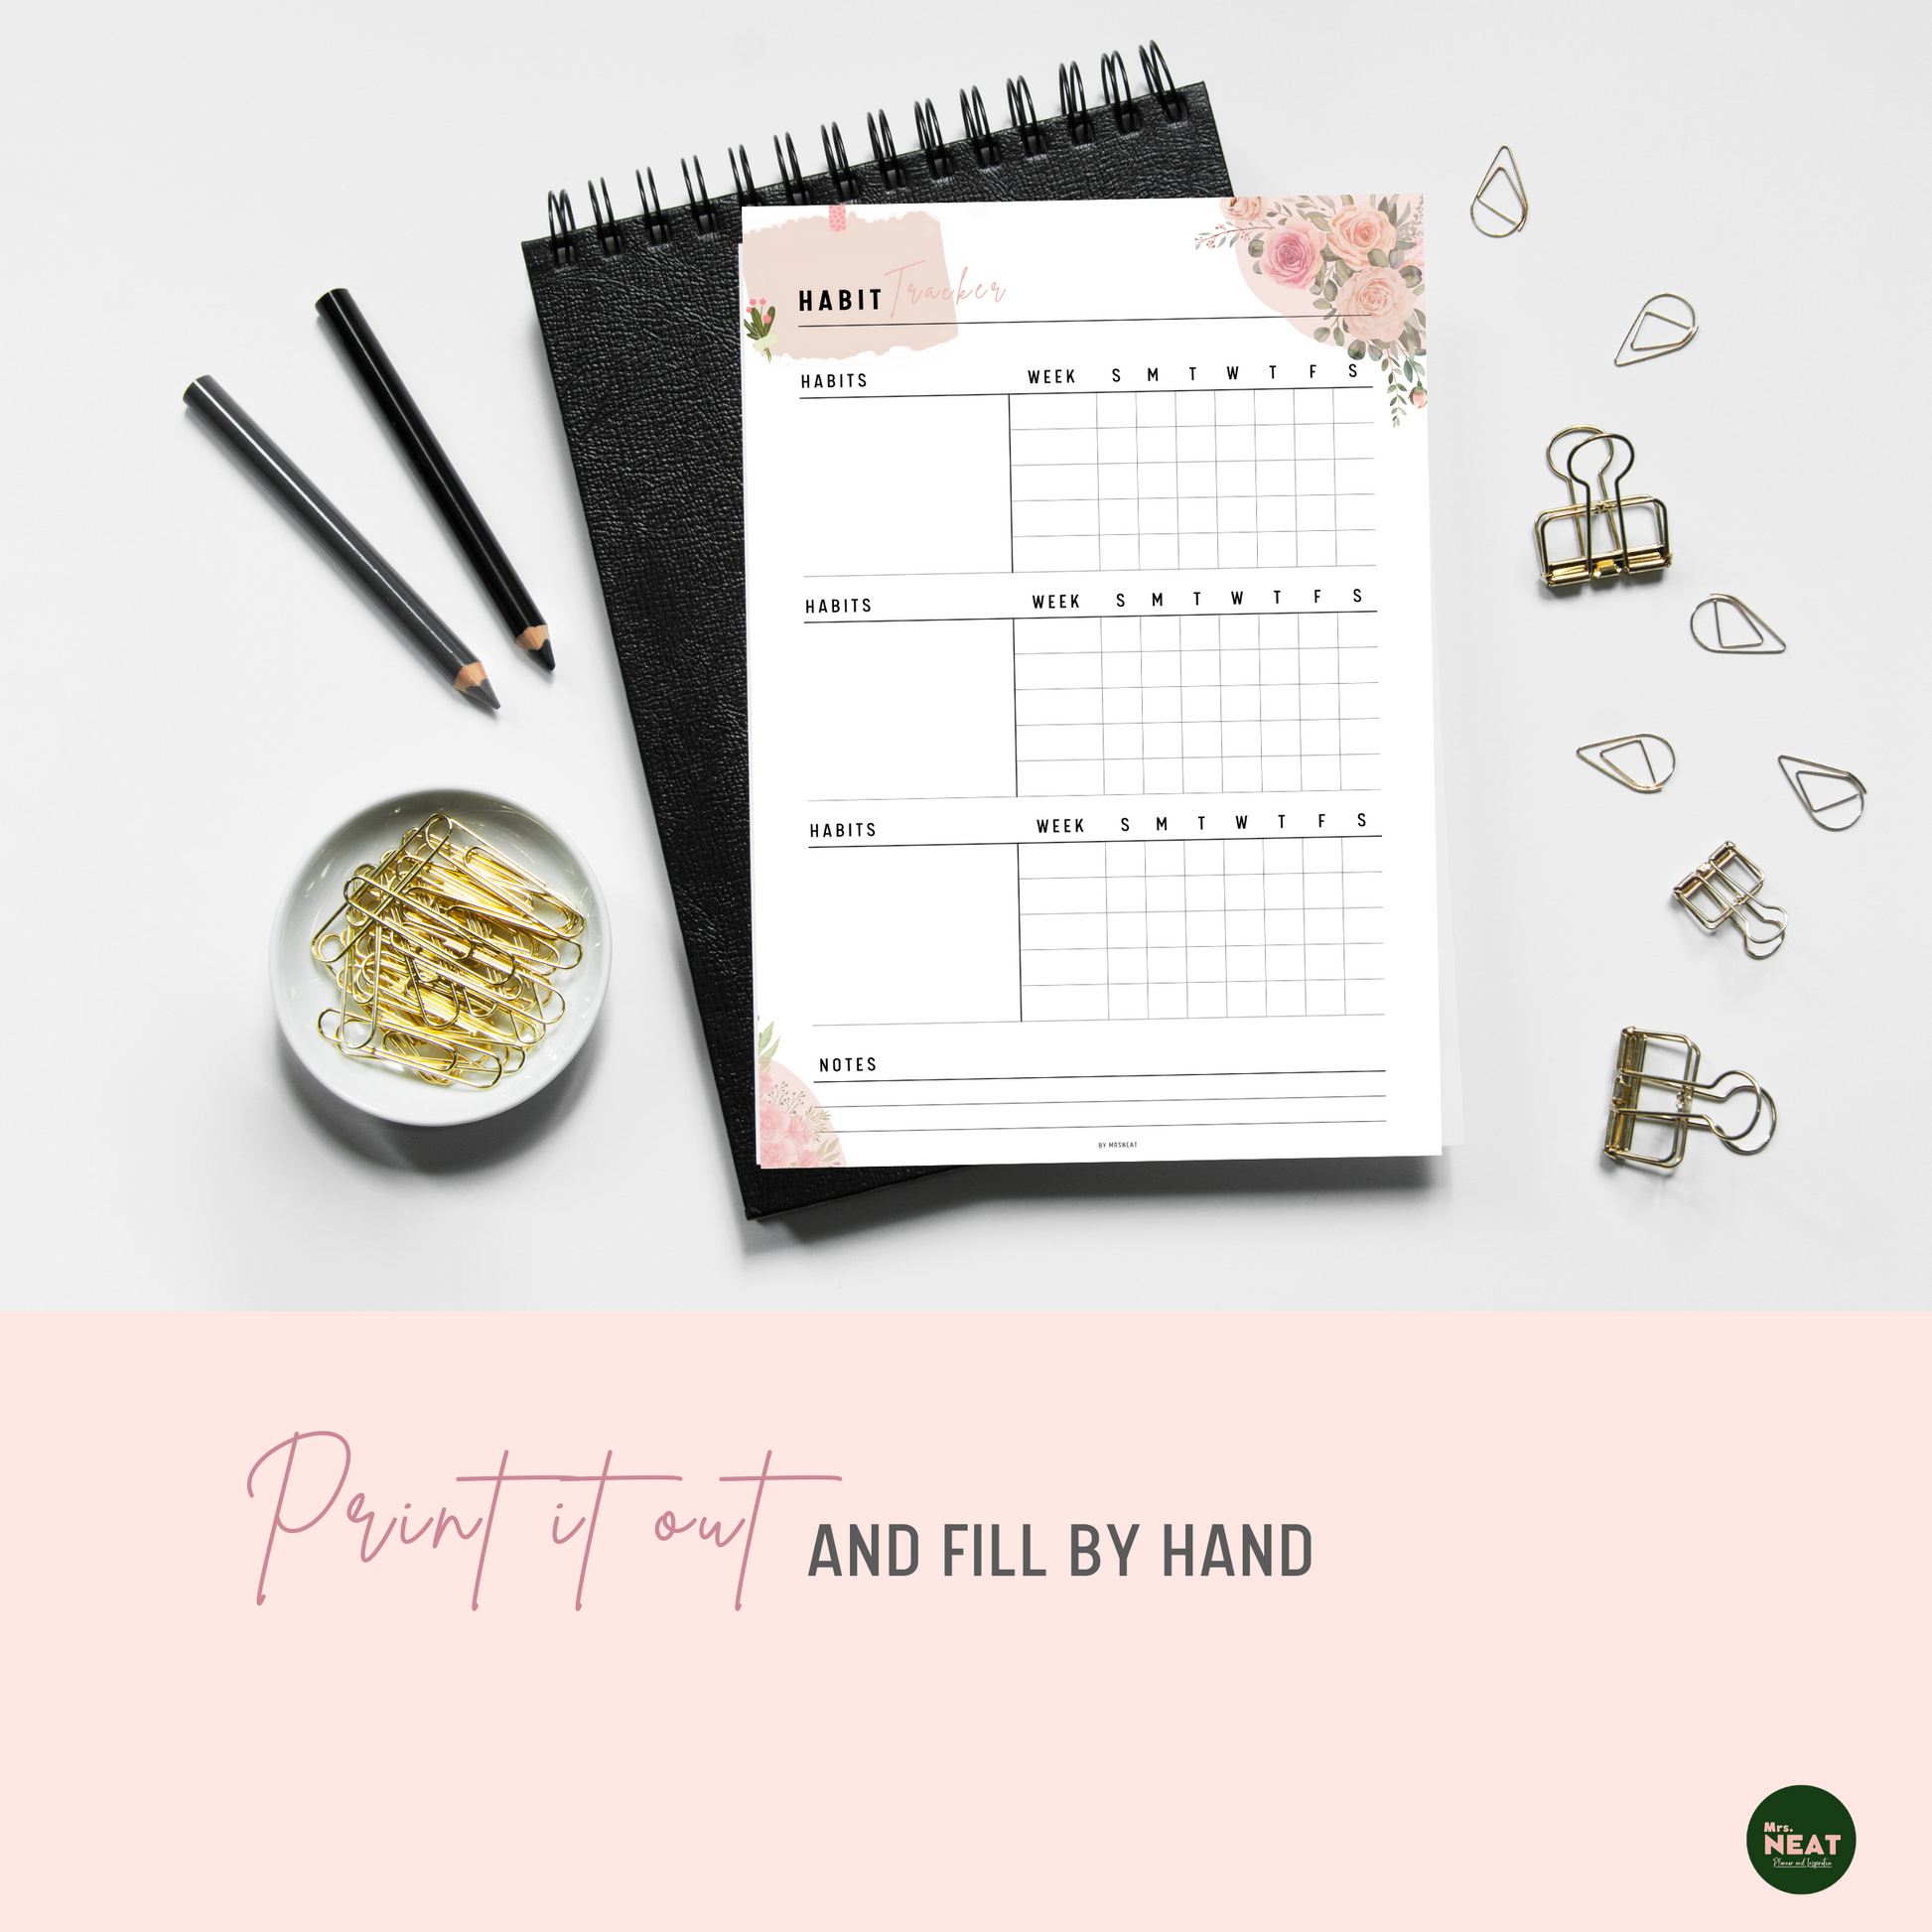 Printed out Floral Habit Tracker and put on the black book with aesthetic gold stationaries